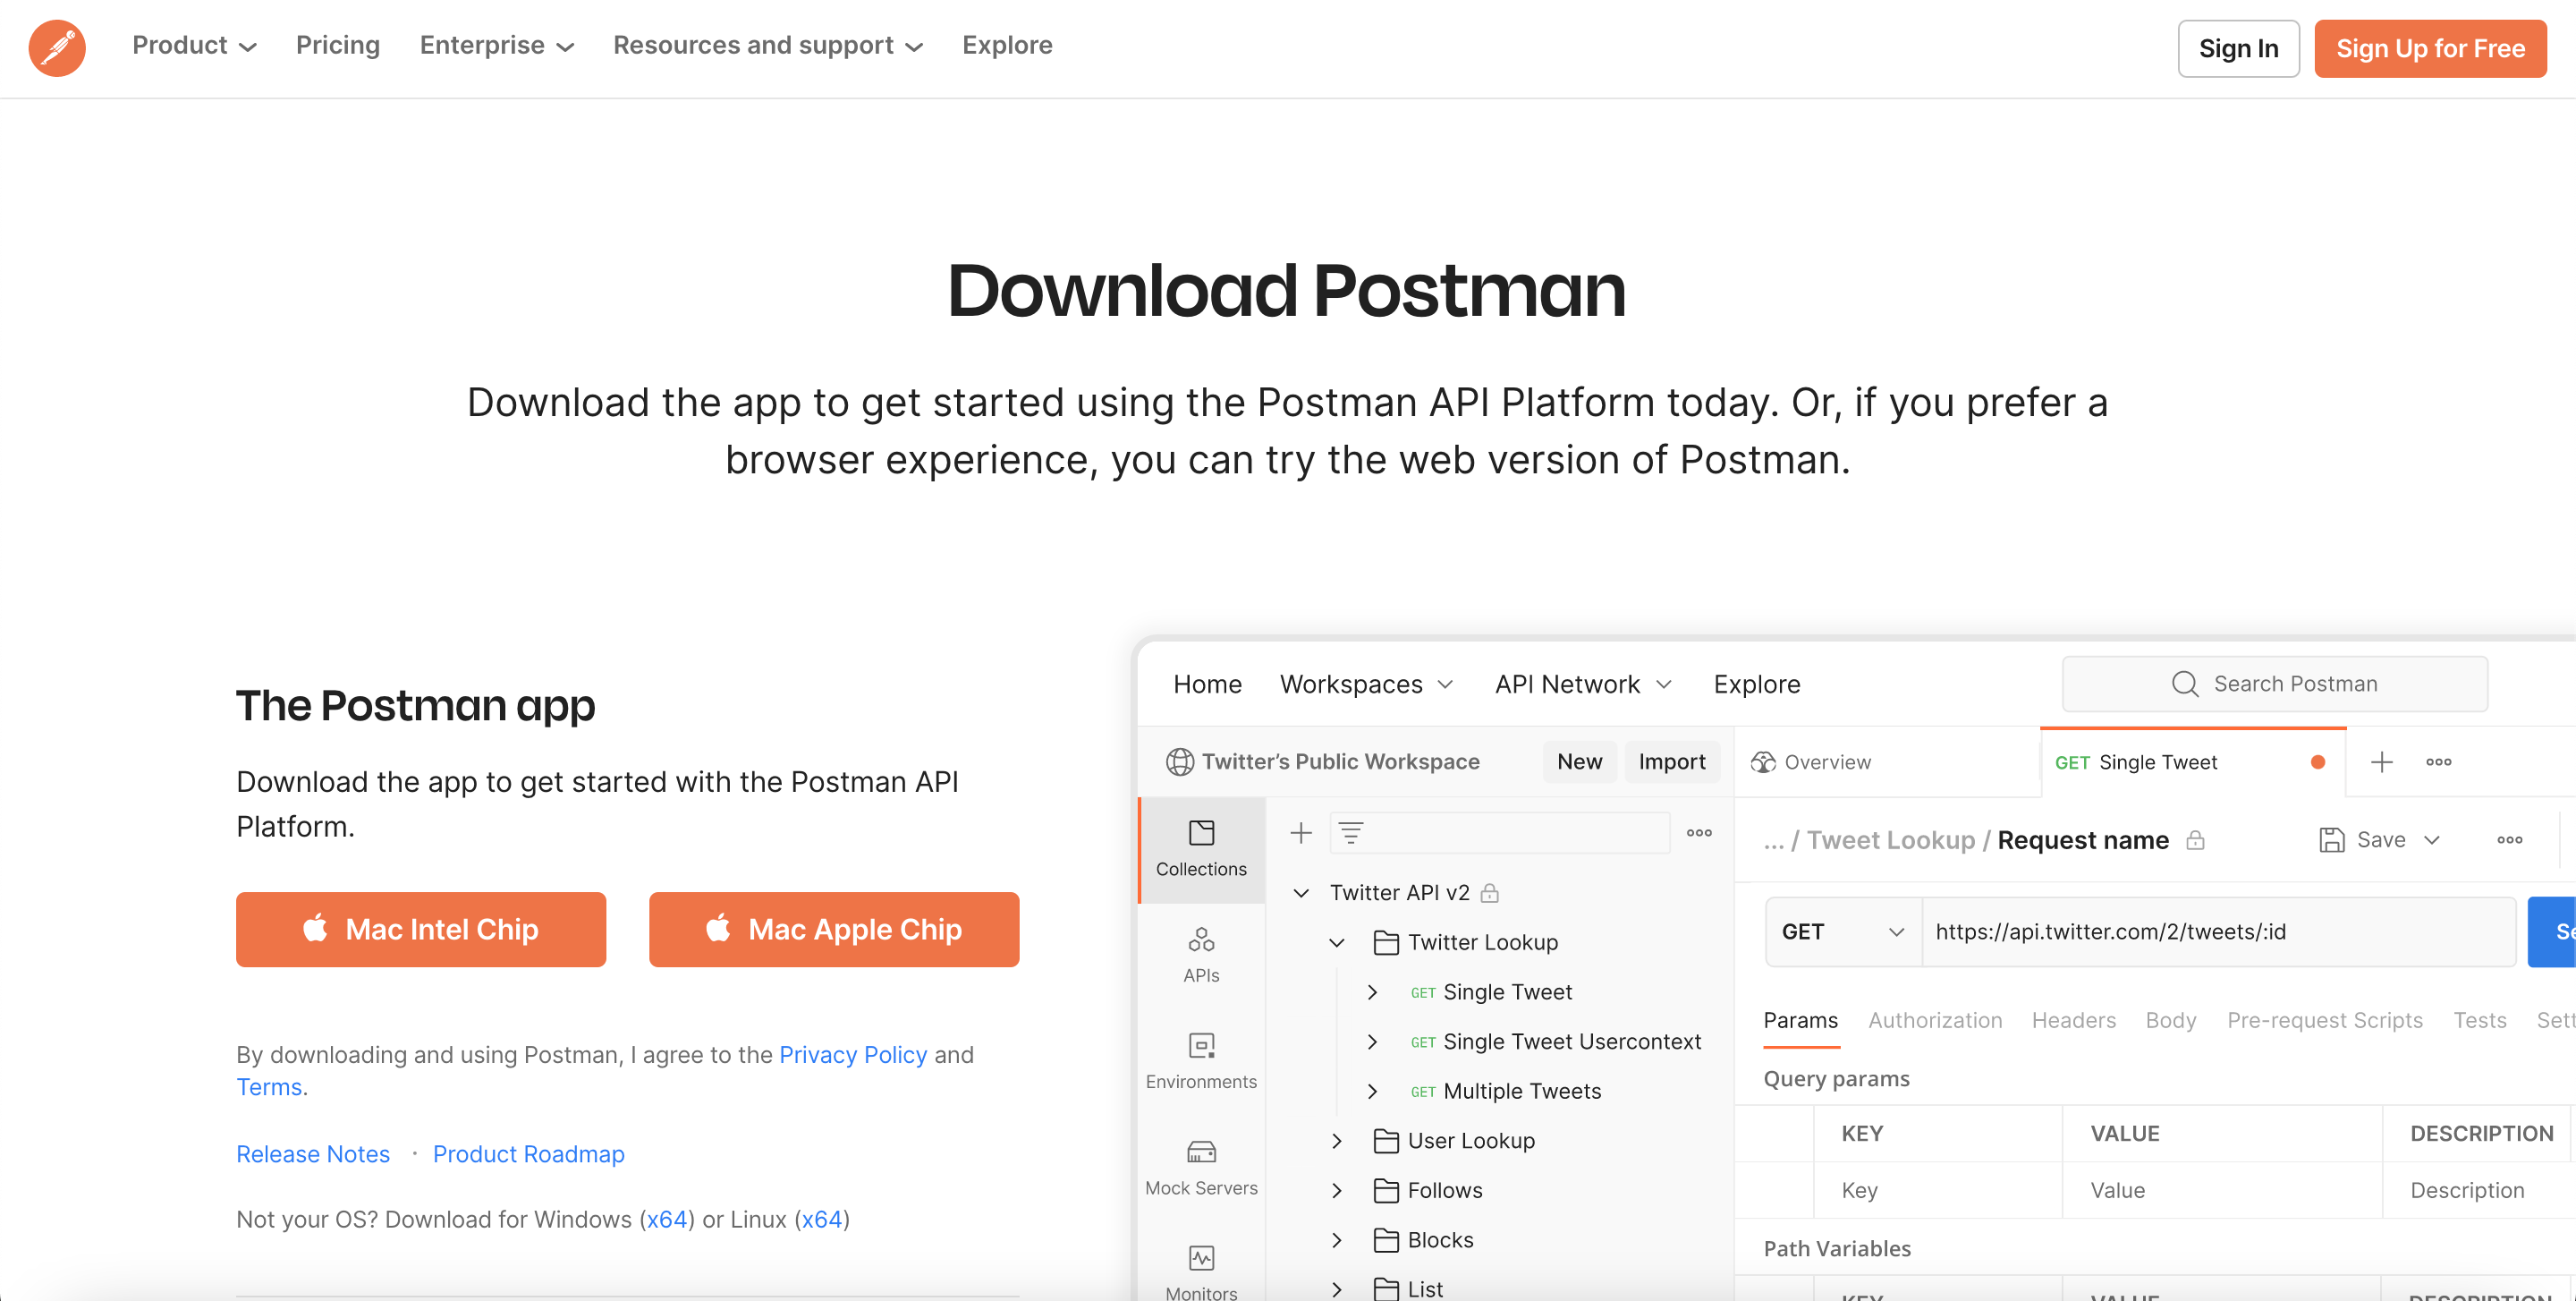 Postman installation page with two Mac options displayed